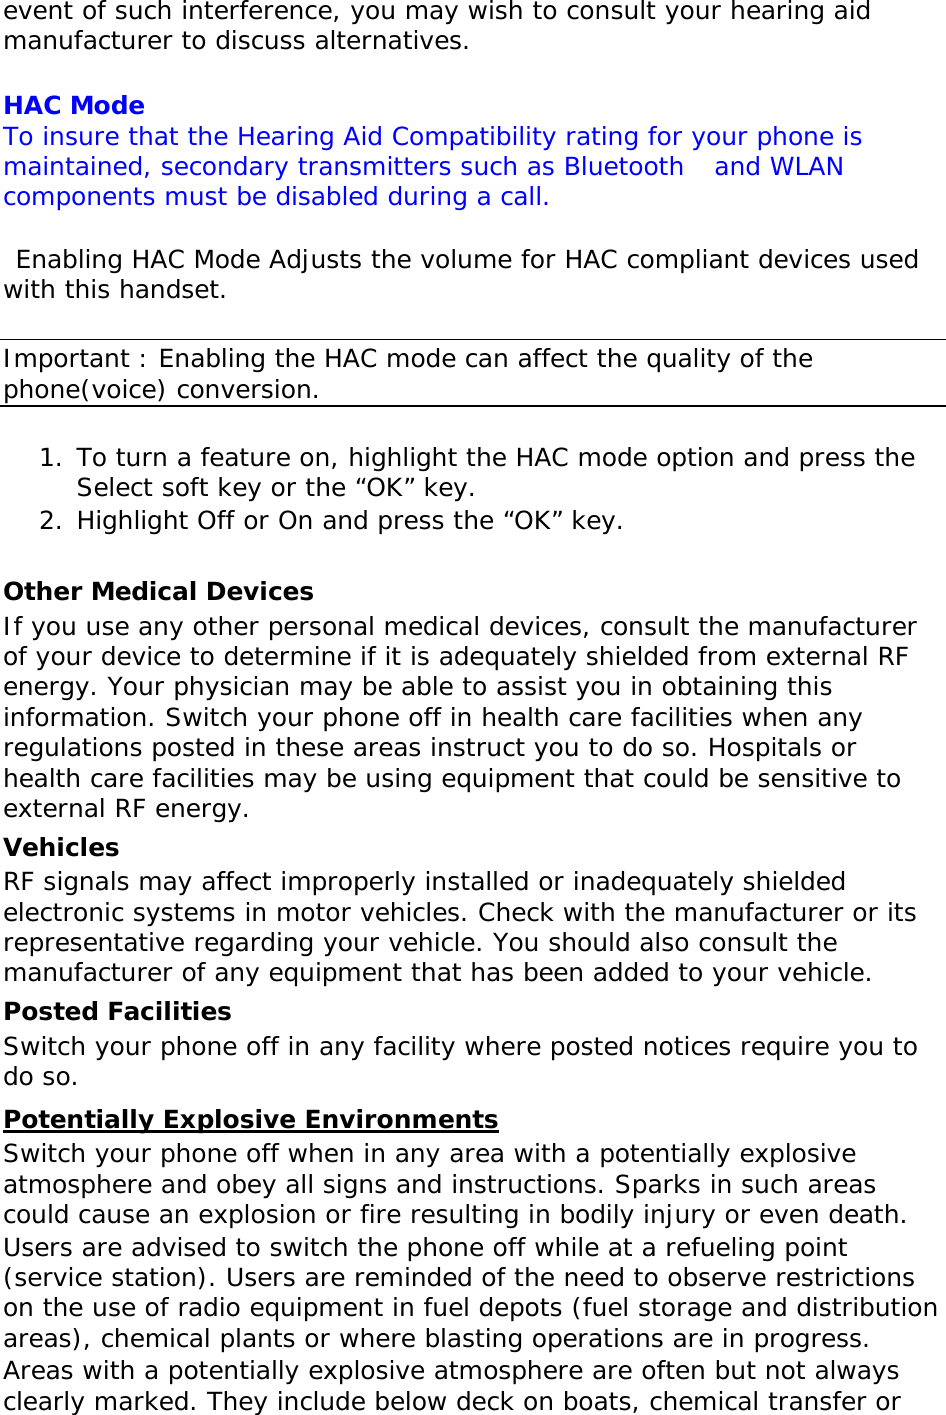 event of such interference, you may wish to consult your hearing aid manufacturer to discuss alternatives.  HAC Mode  To insure that the Hearing Aid Compatibility rating for your phone is maintained, secondary transmitters such as Bluetooth   and WLAN components must be disabled during a call.    Enabling HAC Mode Adjusts the volume for HAC compliant devices used with this handset.  Important : Enabling the HAC mode can affect the quality of the phone(voice) conversion.  1. To turn a feature on, highlight the HAC mode option and press the Select soft key or the “OK” key. 2. Highlight Off or On and press the “OK” key.  Other Medical Devices If you use any other personal medical devices, consult the manufacturer of your device to determine if it is adequately shielded from external RF energy. Your physician may be able to assist you in obtaining this information. Switch your phone off in health care facilities when any regulations posted in these areas instruct you to do so. Hospitals or health care facilities may be using equipment that could be sensitive to external RF energy. Vehicles RF signals may affect improperly installed or inadequately shielded electronic systems in motor vehicles. Check with the manufacturer or its representative regarding your vehicle. You should also consult the manufacturer of any equipment that has been added to your vehicle. Posted Facilities Switch your phone off in any facility where posted notices require you to do so. Potentially Explosive Environments Switch your phone off when in any area with a potentially explosive atmosphere and obey all signs and instructions. Sparks in such areas could cause an explosion or fire resulting in bodily injury or even death. Users are advised to switch the phone off while at a refueling point (service station). Users are reminded of the need to observe restrictions on the use of radio equipment in fuel depots (fuel storage and distribution areas), chemical plants or where blasting operations are in progress. Areas with a potentially explosive atmosphere are often but not always clearly marked. They include below deck on boats, chemical transfer or 